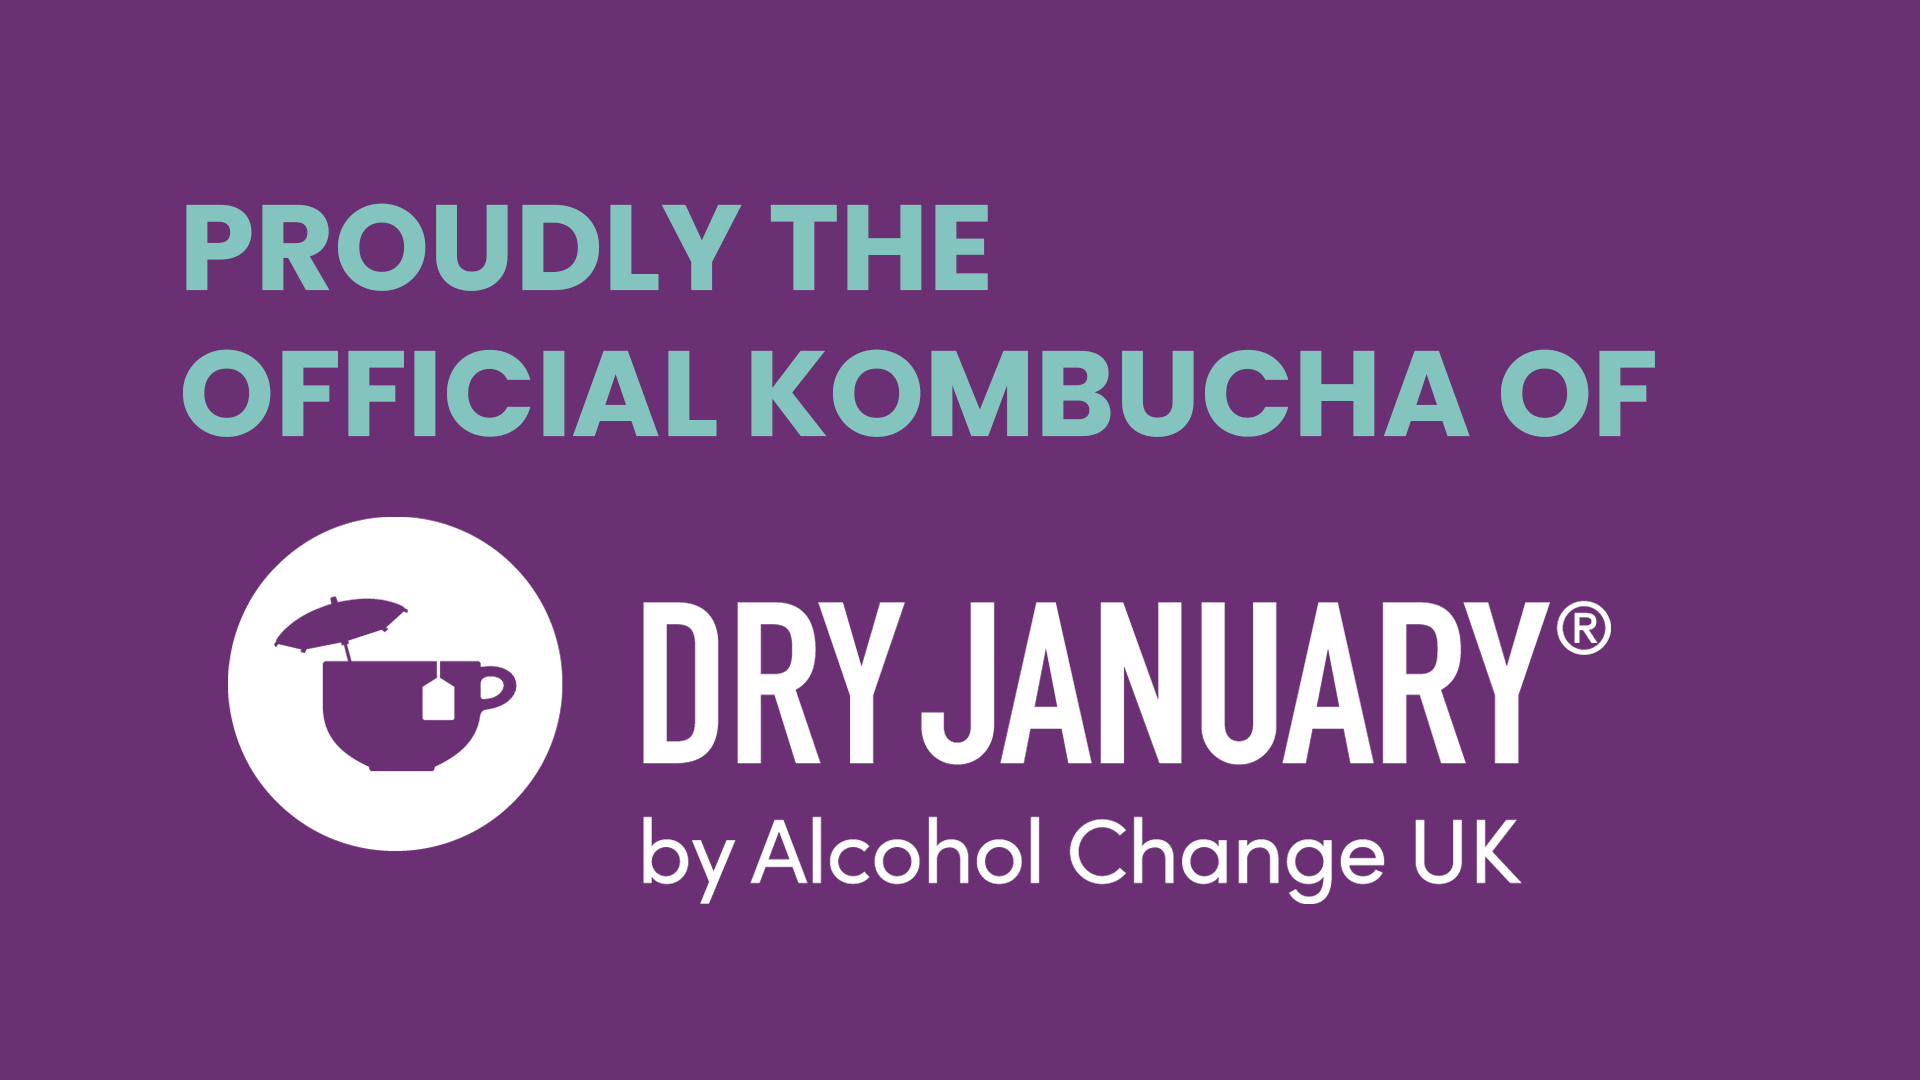 Nunc is the official kombucha of Dry January. Perfect for those going dry for January and looking for low to no alcohol alternatives